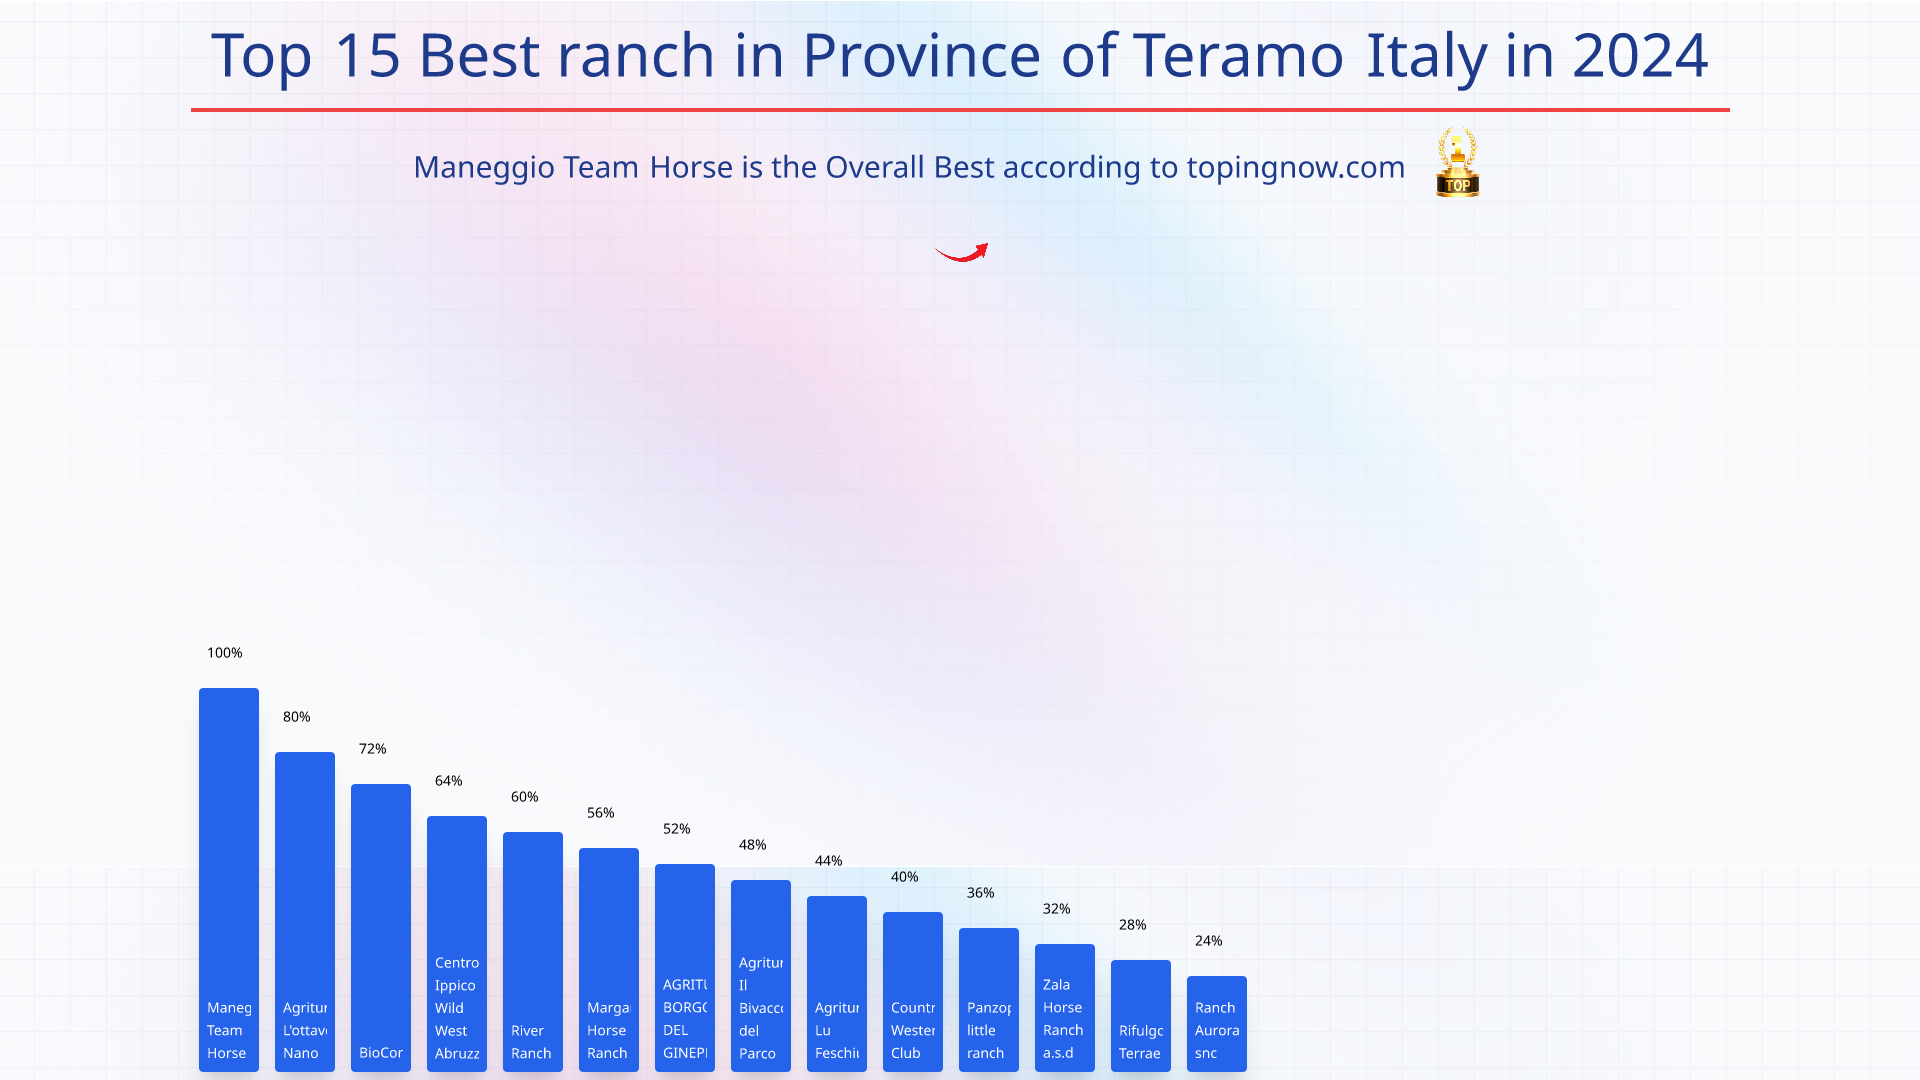 Top 15 Best ranch in Province of Teramo Italy in 2024: Top 15 Best ranch in Province of Teramo Italy in 2024